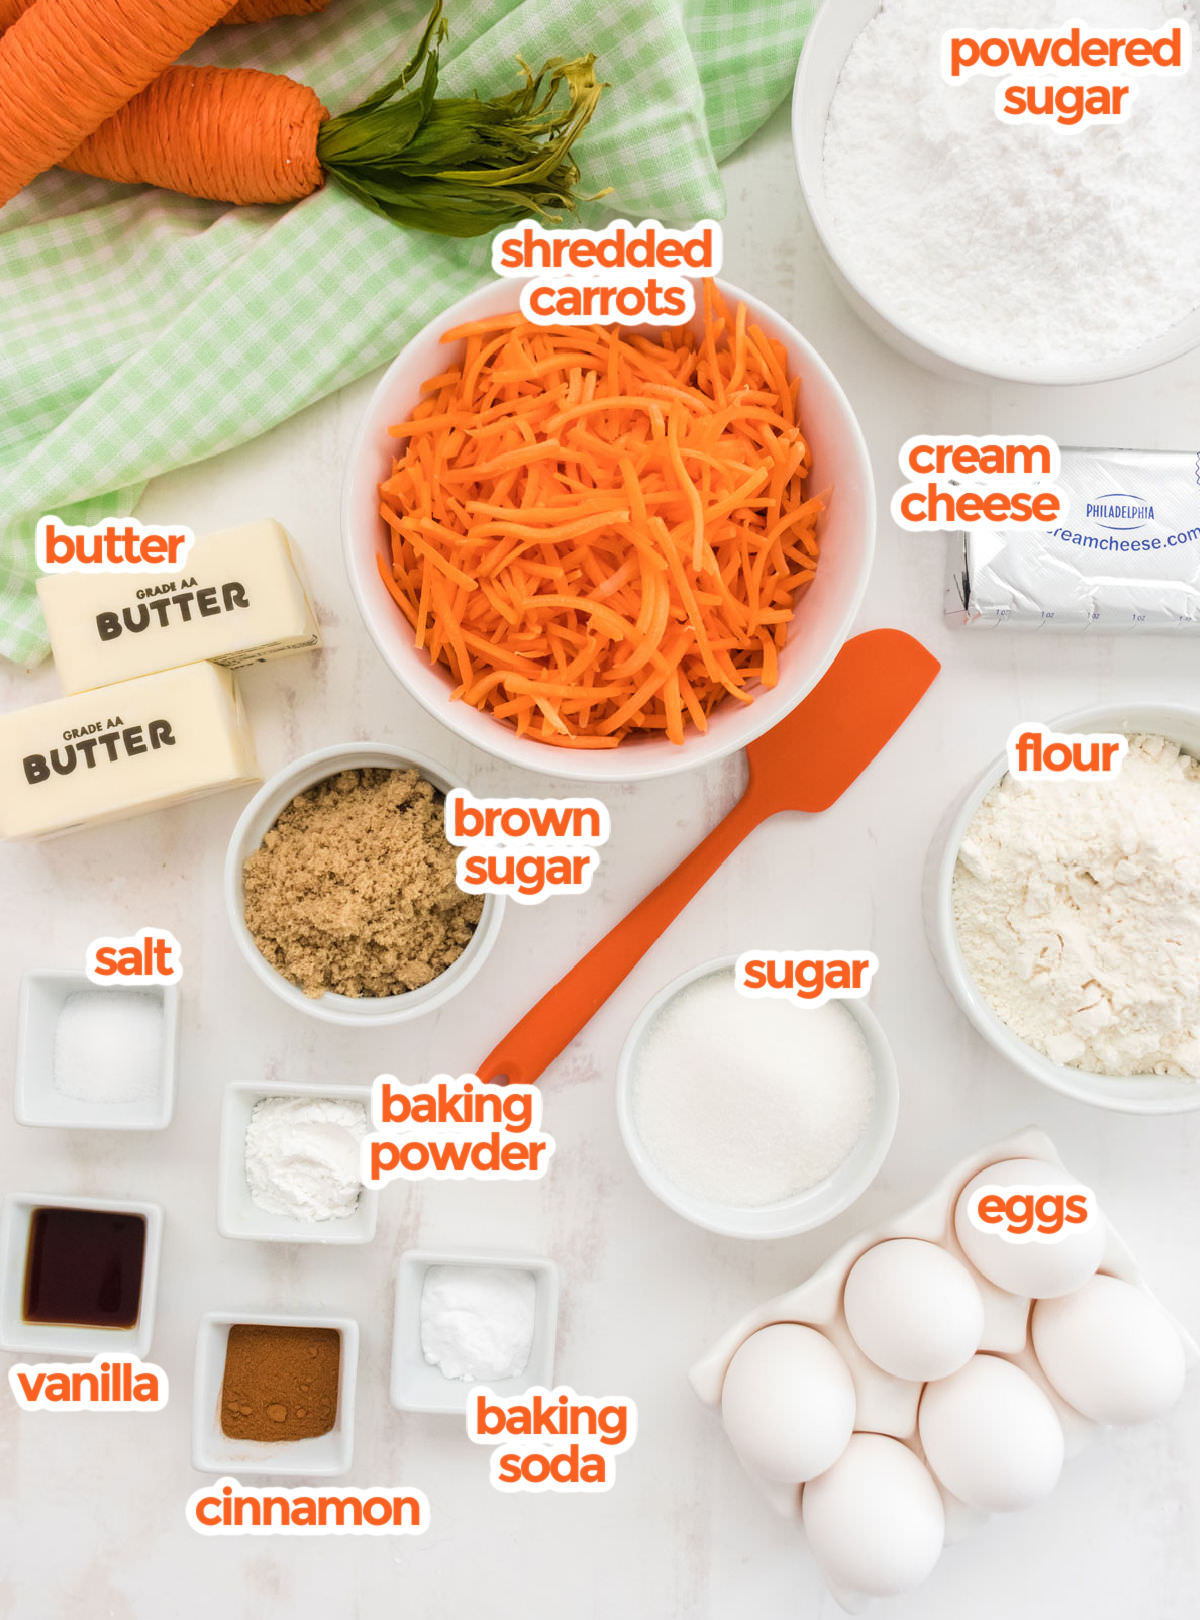 All the ingredients you will need to make Carrot Cake Cookies including carrots, powdered sugar, cream cheese, flour, eggs, sugar, brown sugar, butter, salt, baking powder, baking soda, cinnamon and vanilla.